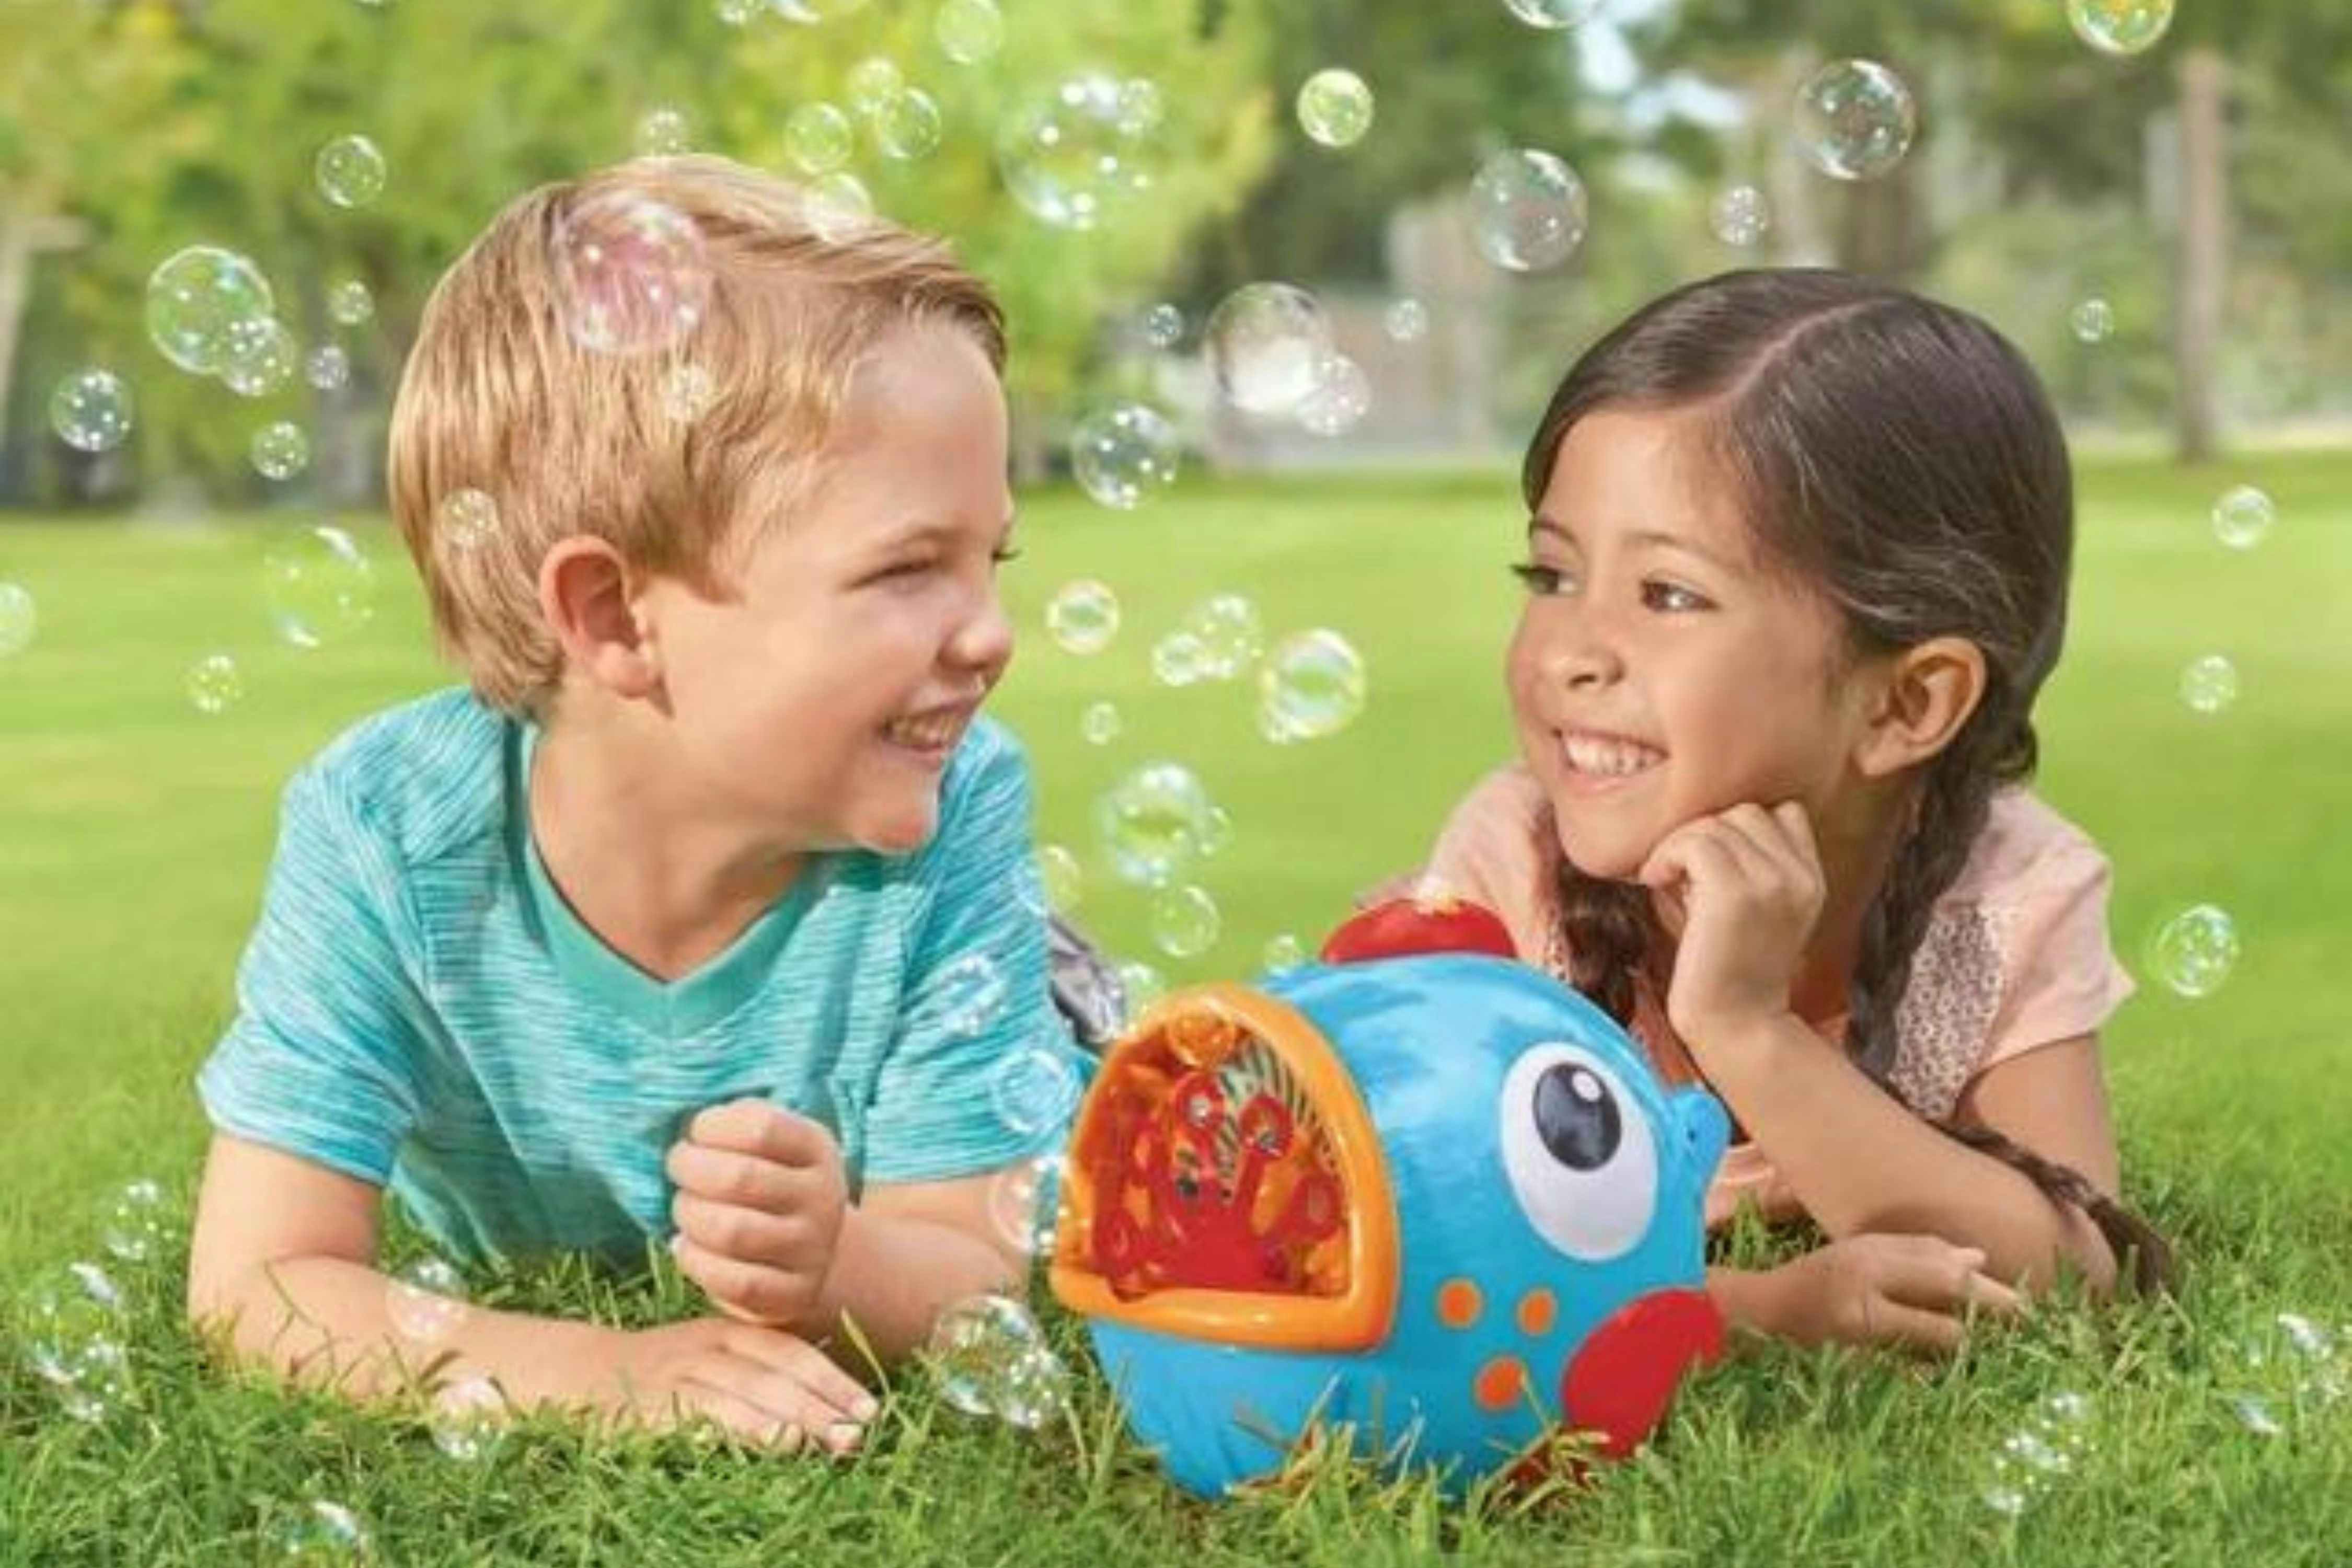 Fish Bubble Blower, Only $3.63 at Walmart (Will Sell Out)